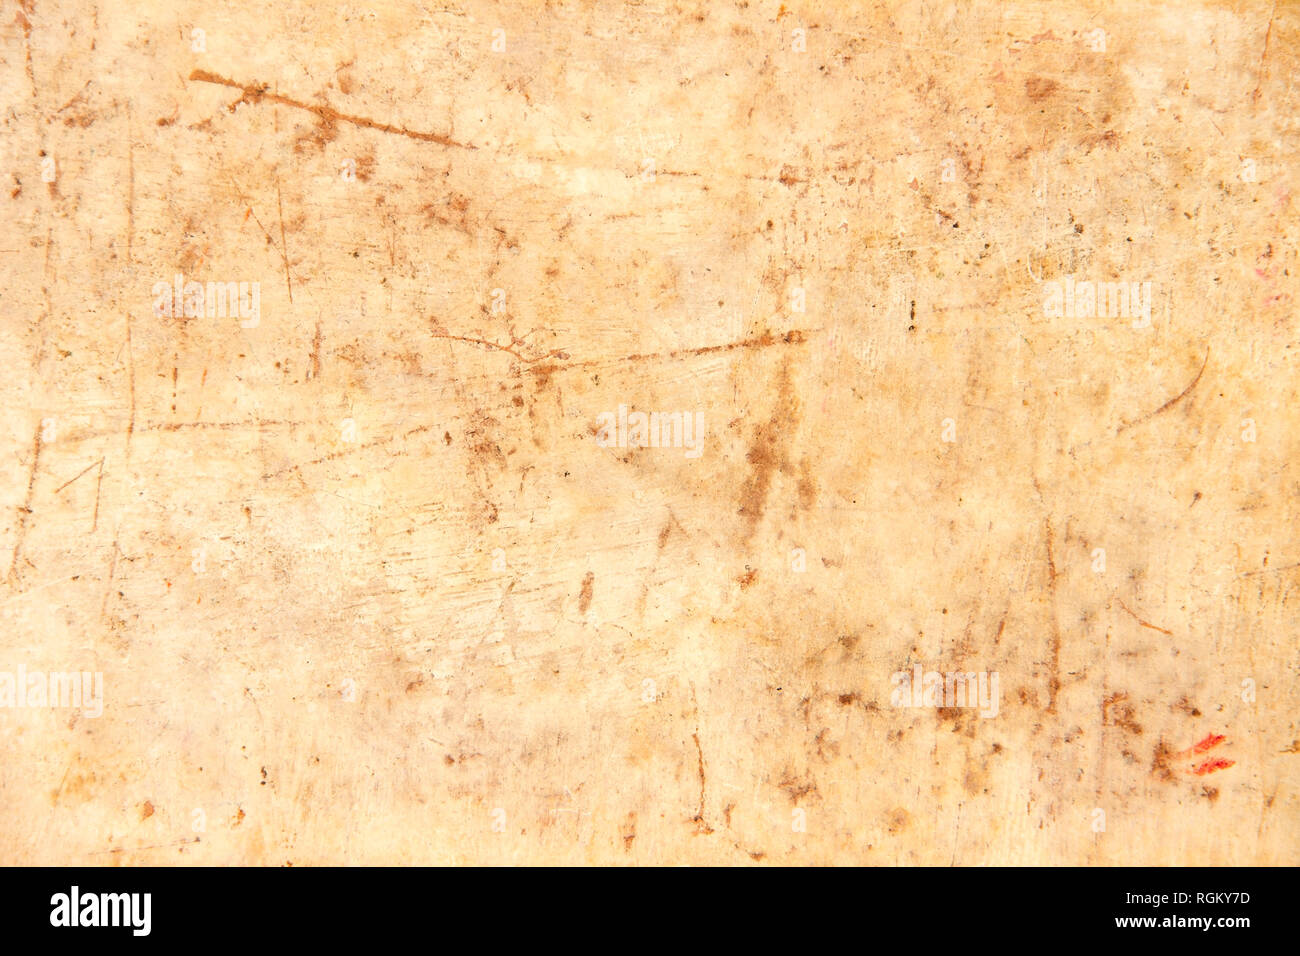 The old scratched and stained paper texture Stock Photo